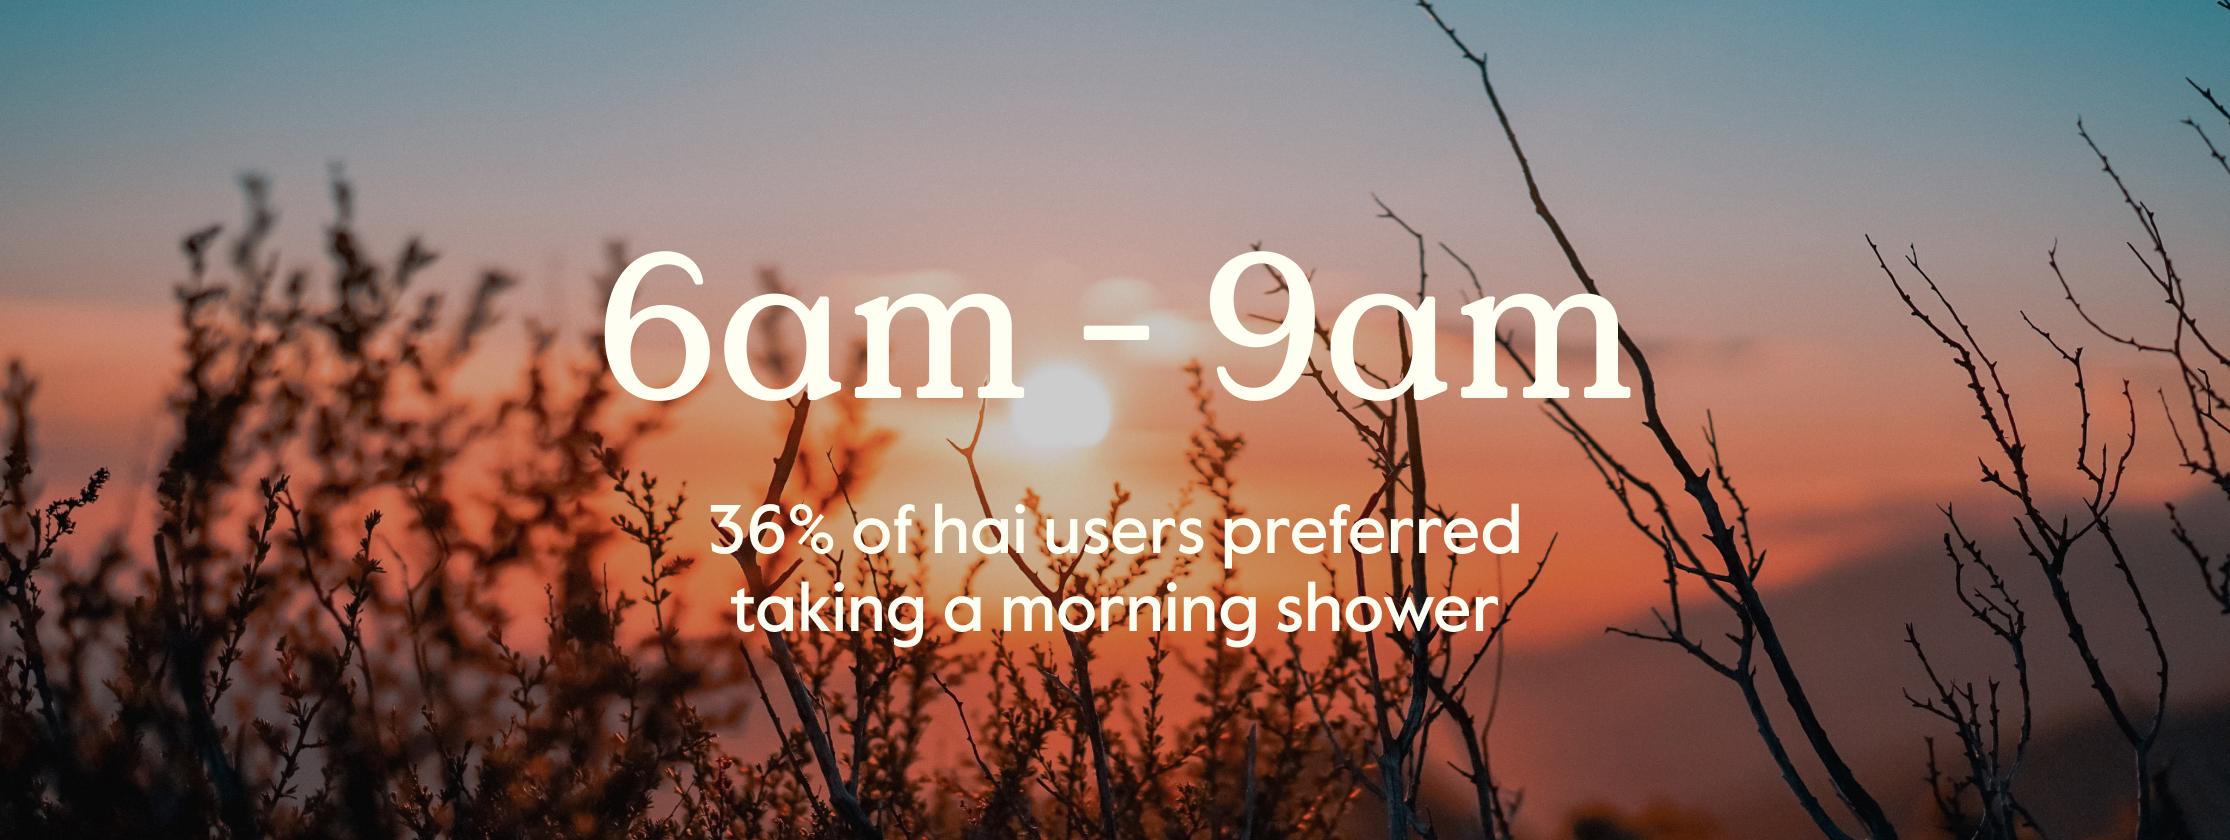 Time of day users shower most with hai smart showerhead